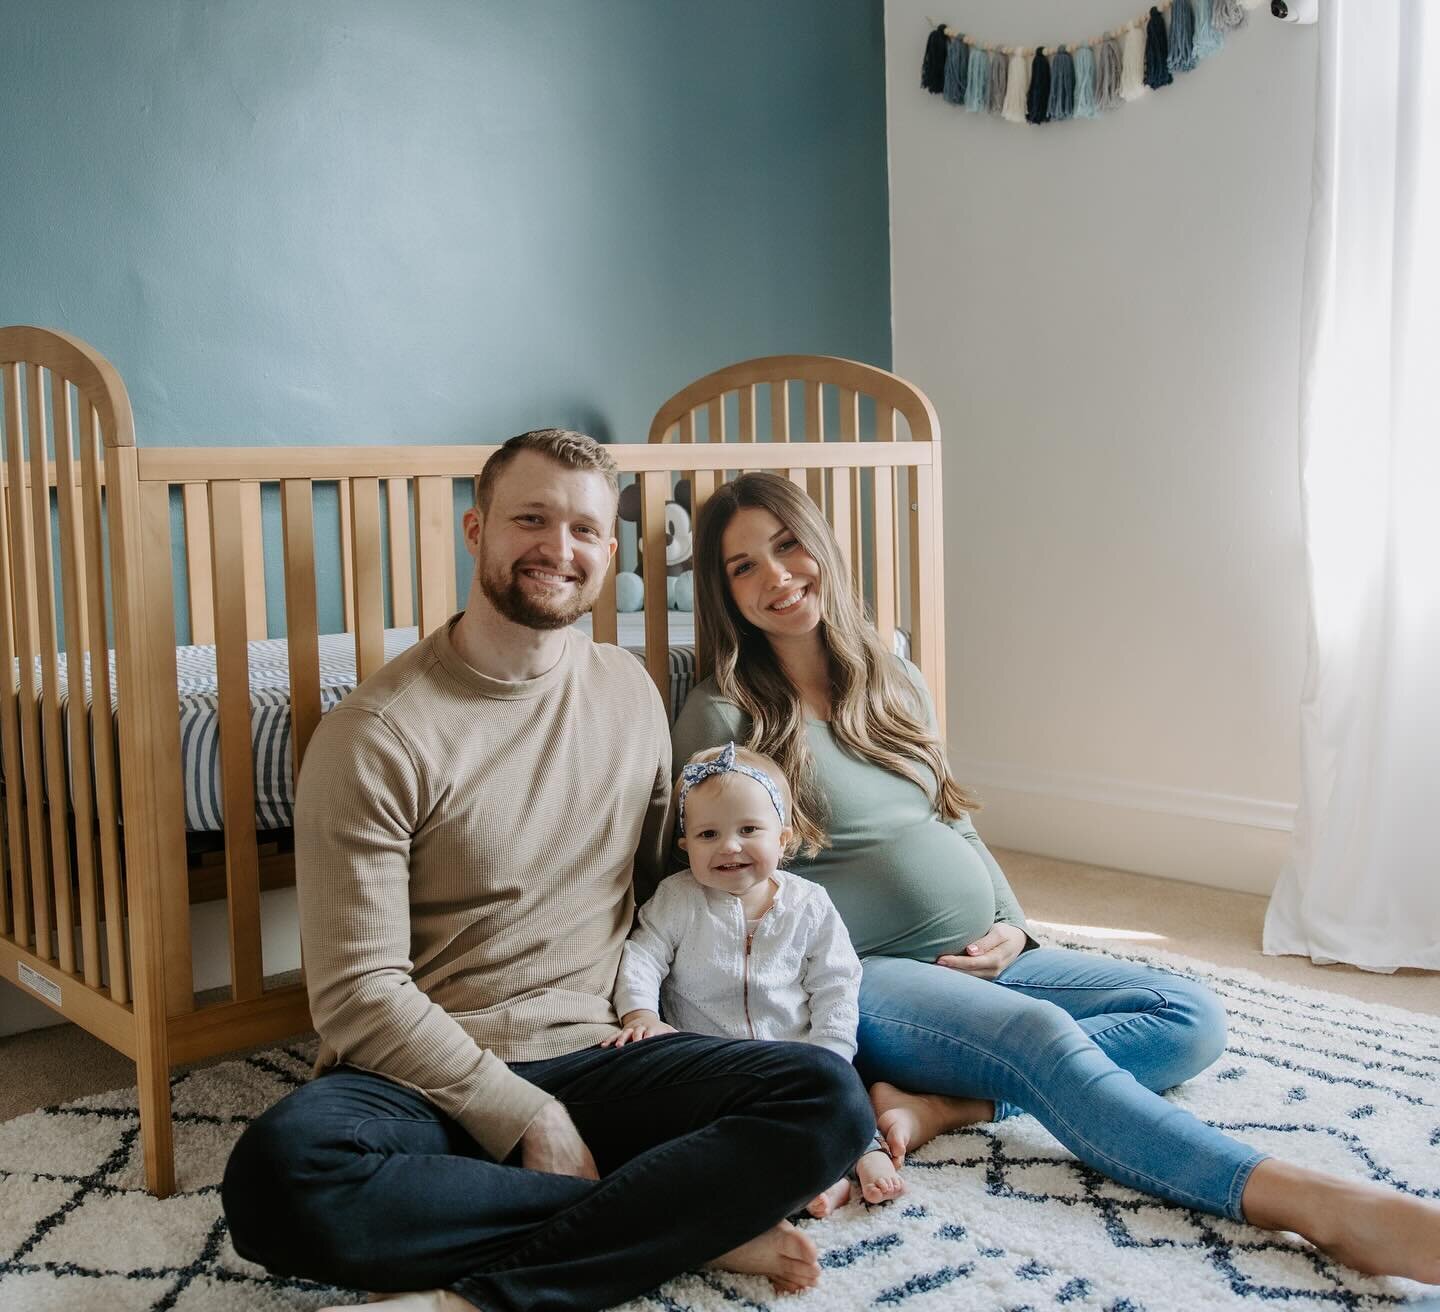 Here&rsquo;s your reminder to get photos done before your little one arrives. Even if you don&rsquo;t feel like you want to now, you&rsquo;ll wish you did after baby is here. A short in-home session is typically low effort and super quick. 

#inhomes